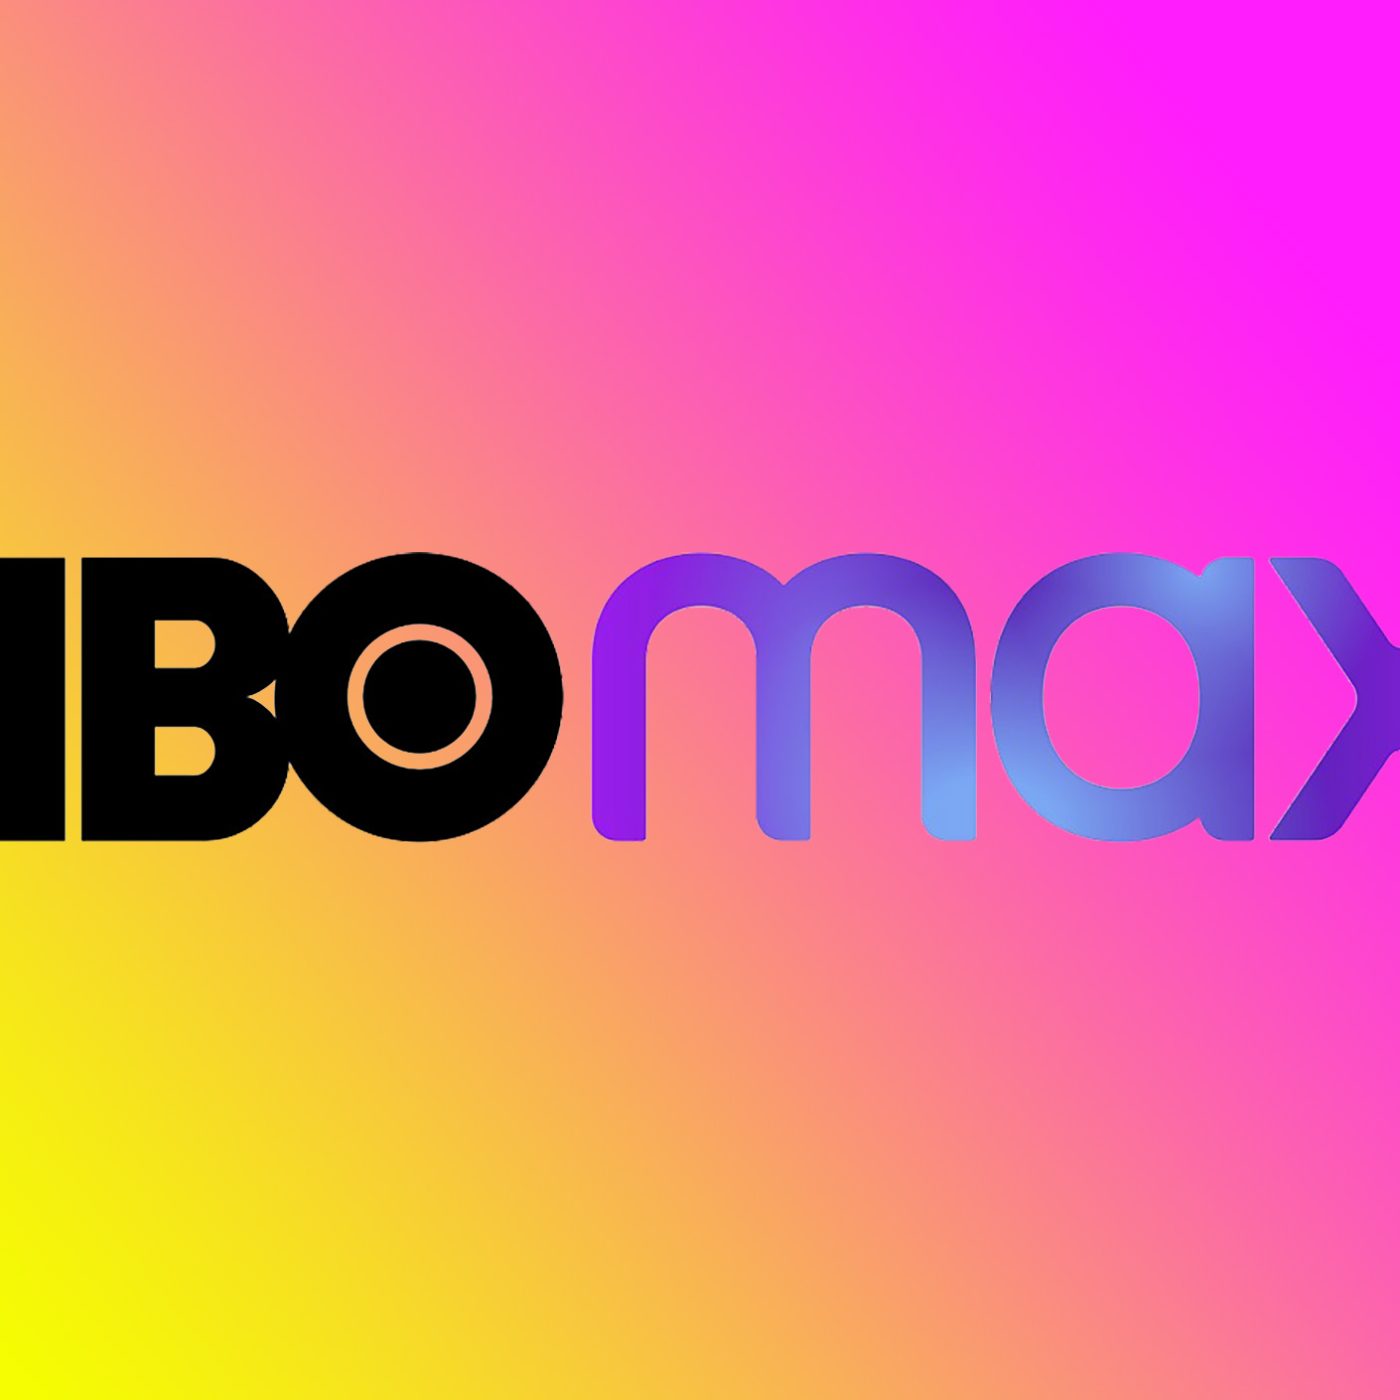 HBO Max vs. Netflix: The Pros, Cons and How to Pick One - CNET